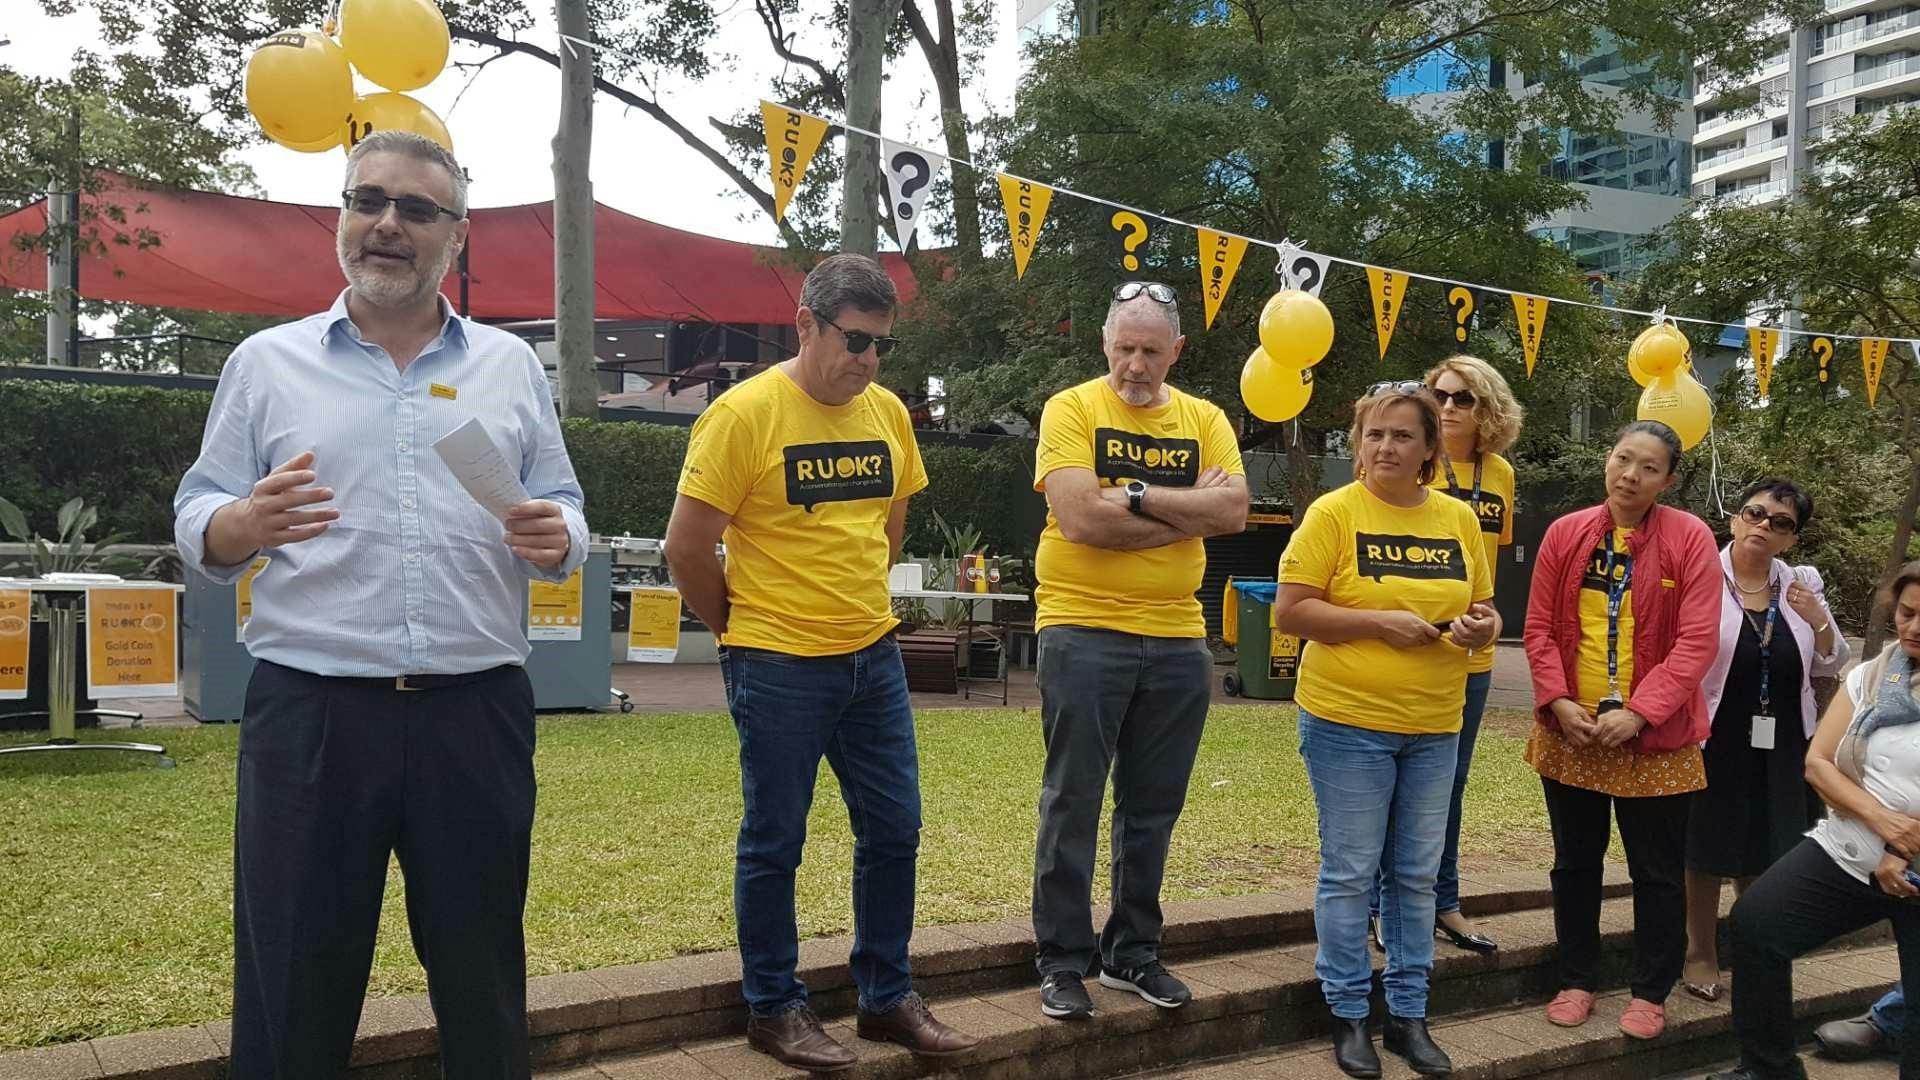 Speakers and Mental Health First Aiders at Chatswood event